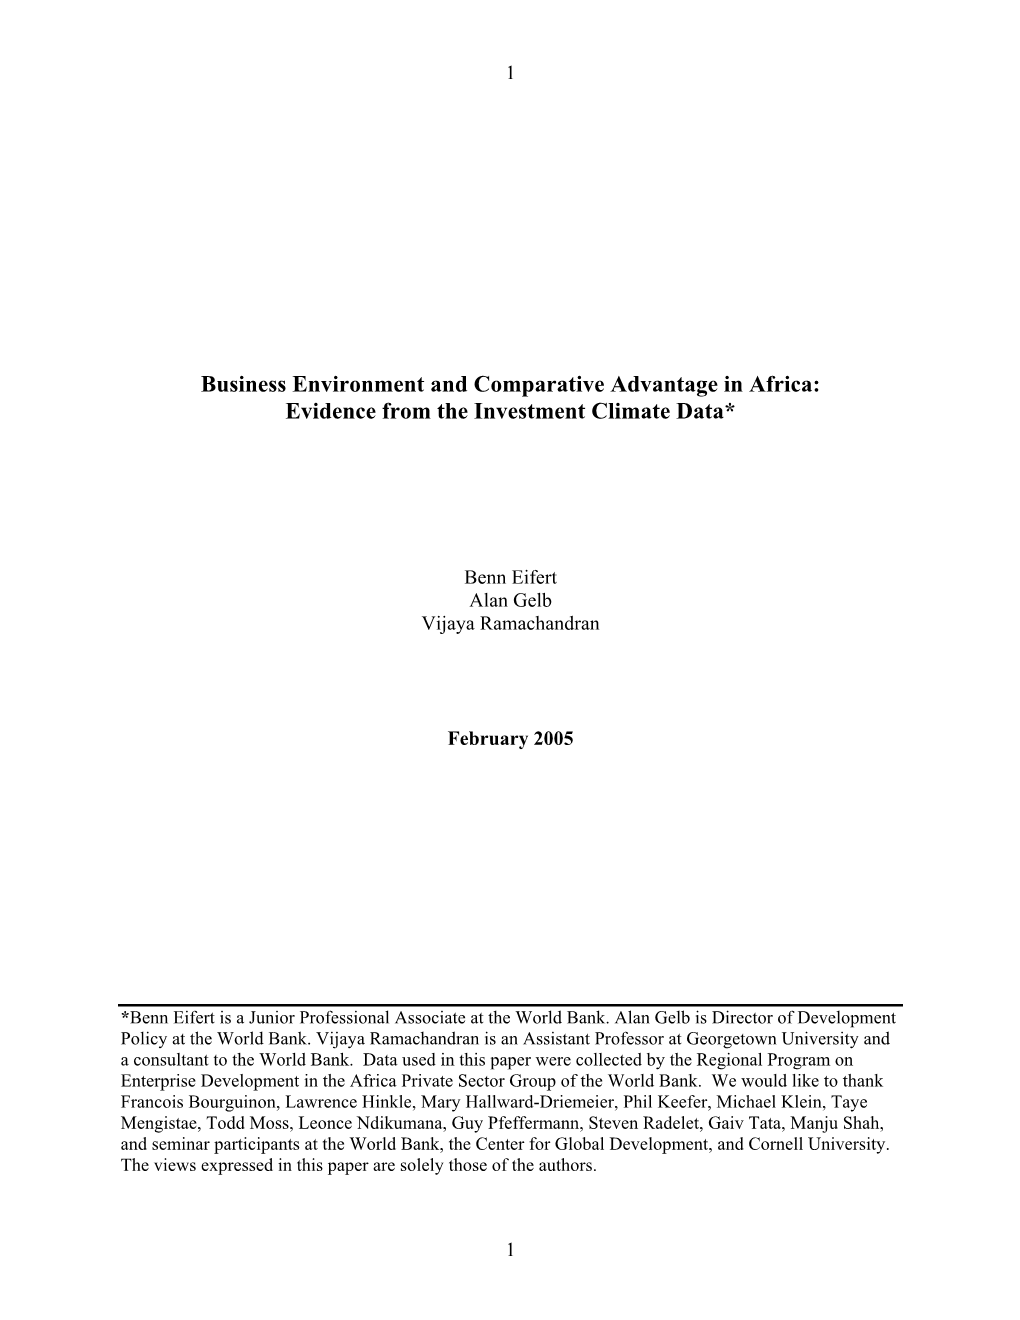 Business Environment and Comparative Advantage in Africa: Evidence from the Investment Climate Data*